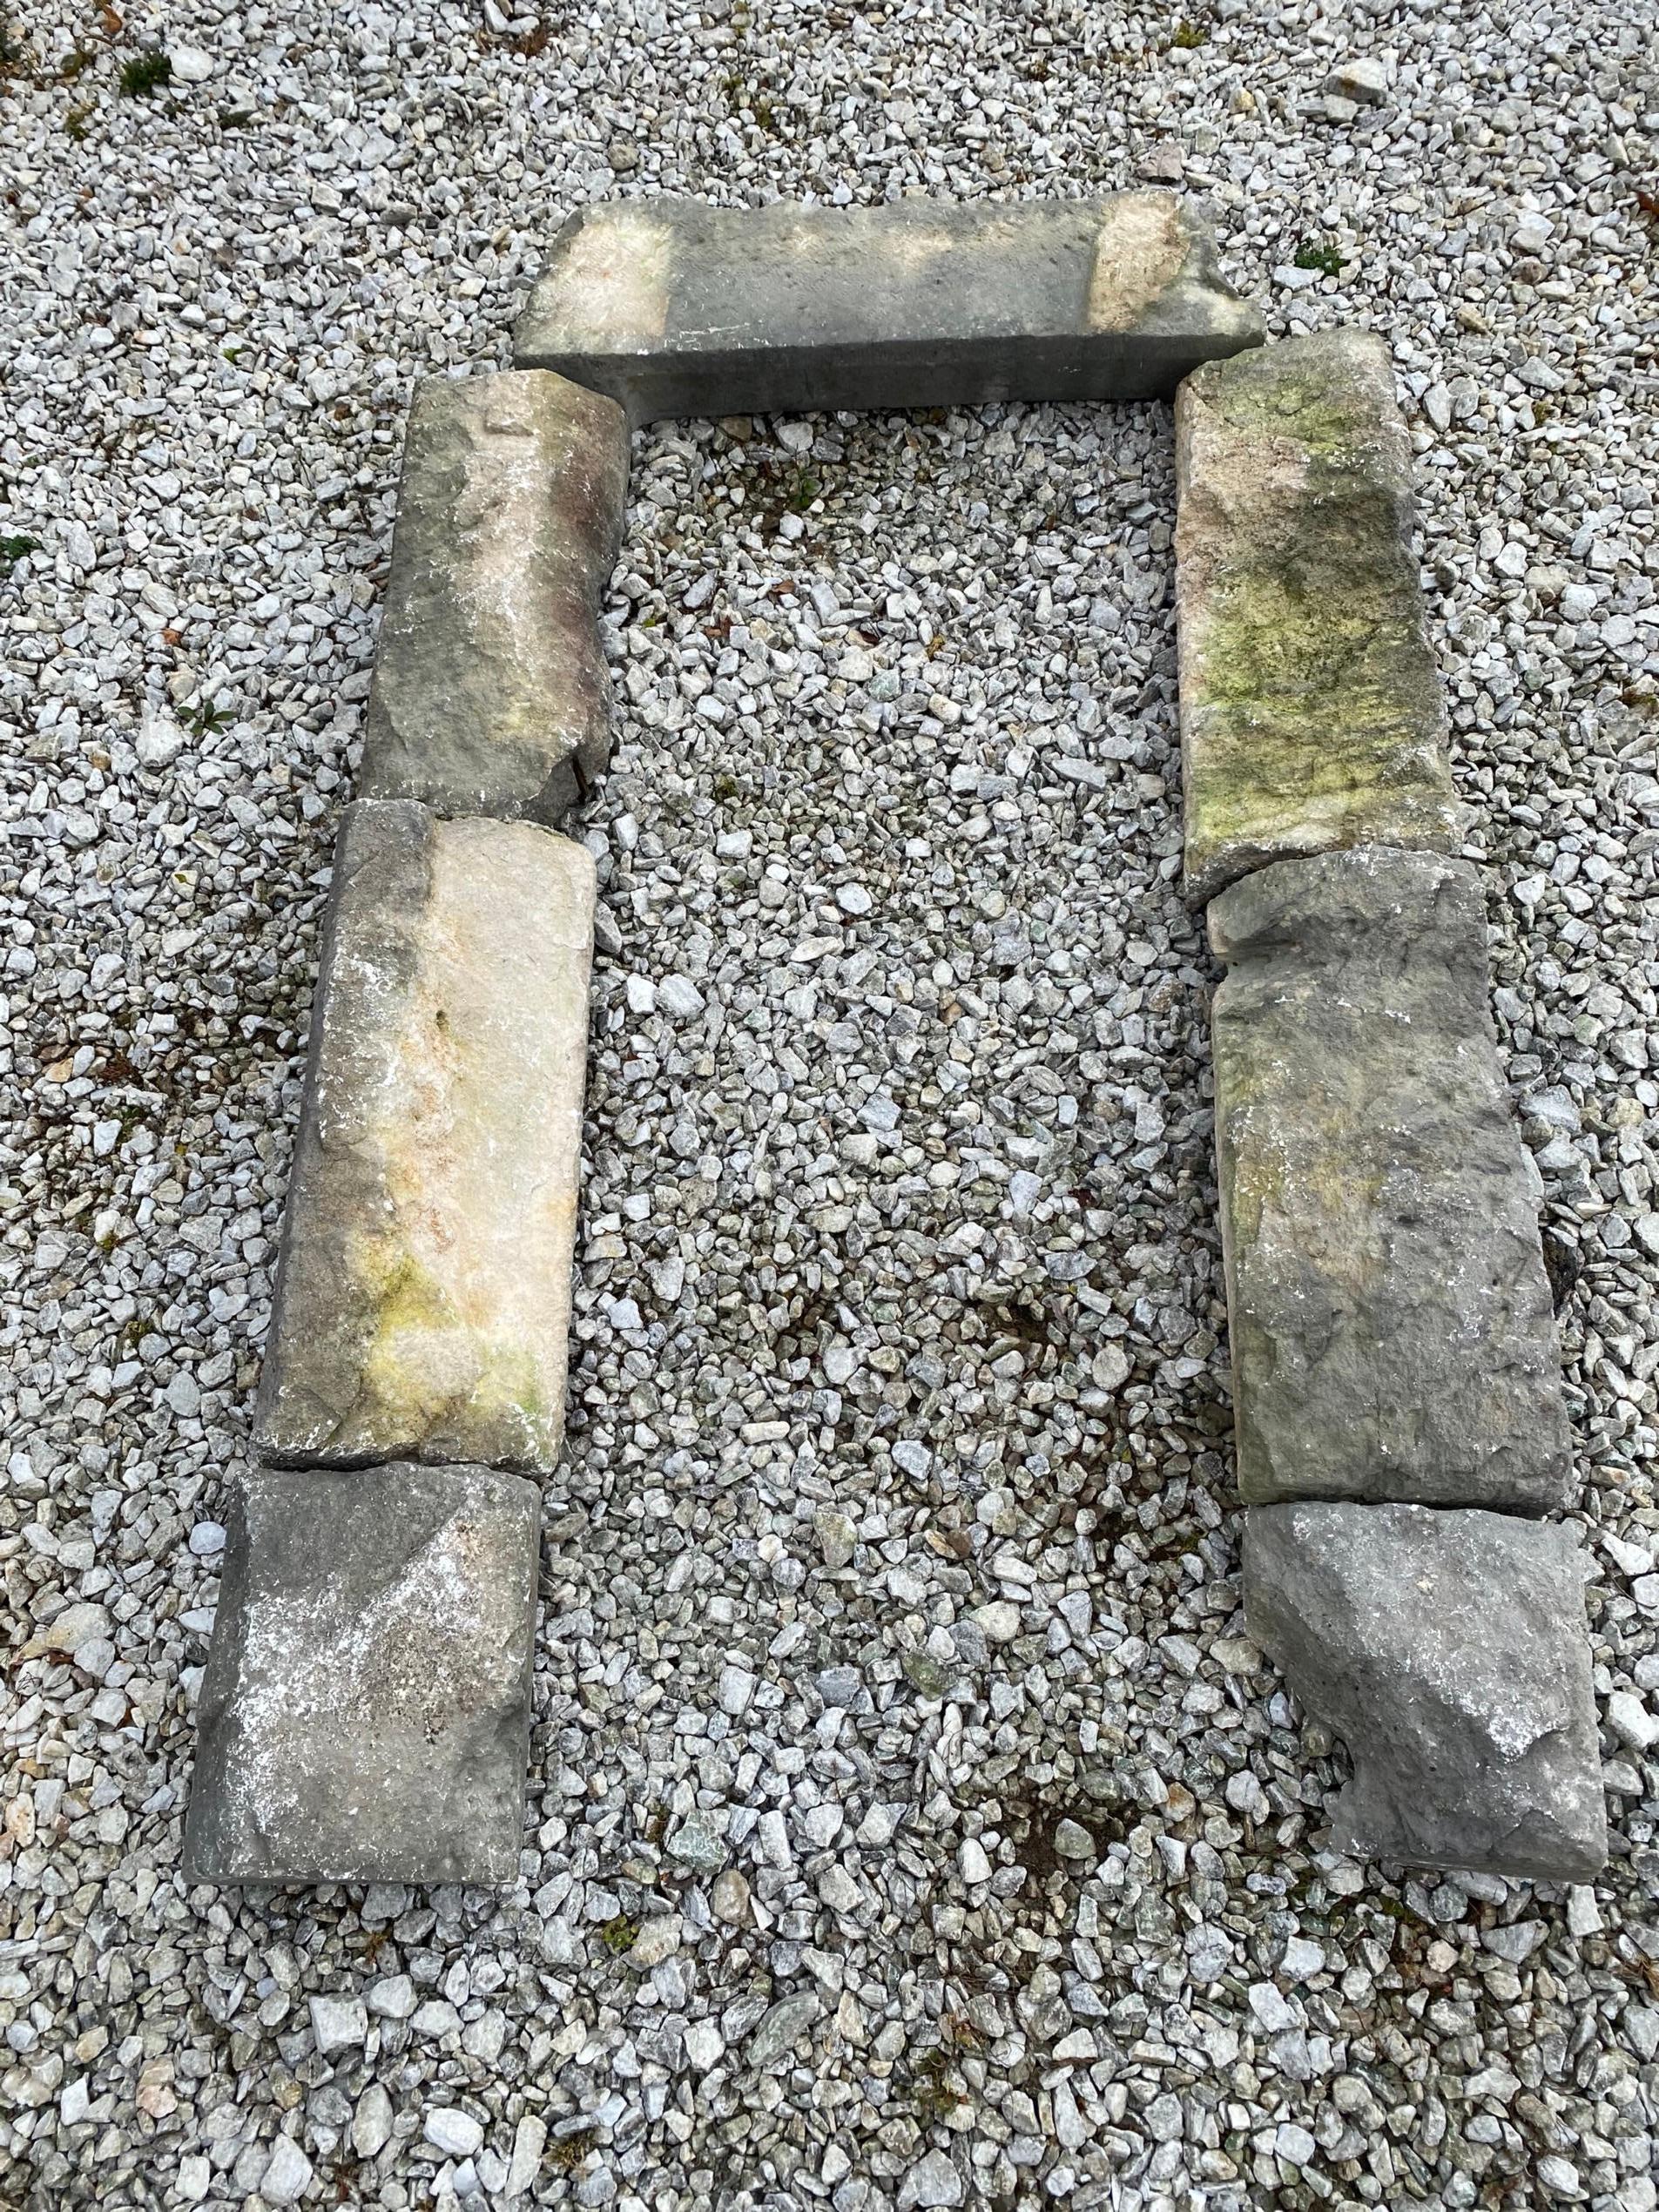 18th Century or earlier, rustic French country portal door frame for garden wall entrance. Stones are hand-carved in grey stone for a country farm house.
A stone mason should be able to make this work. the portal is rough but will definitely add